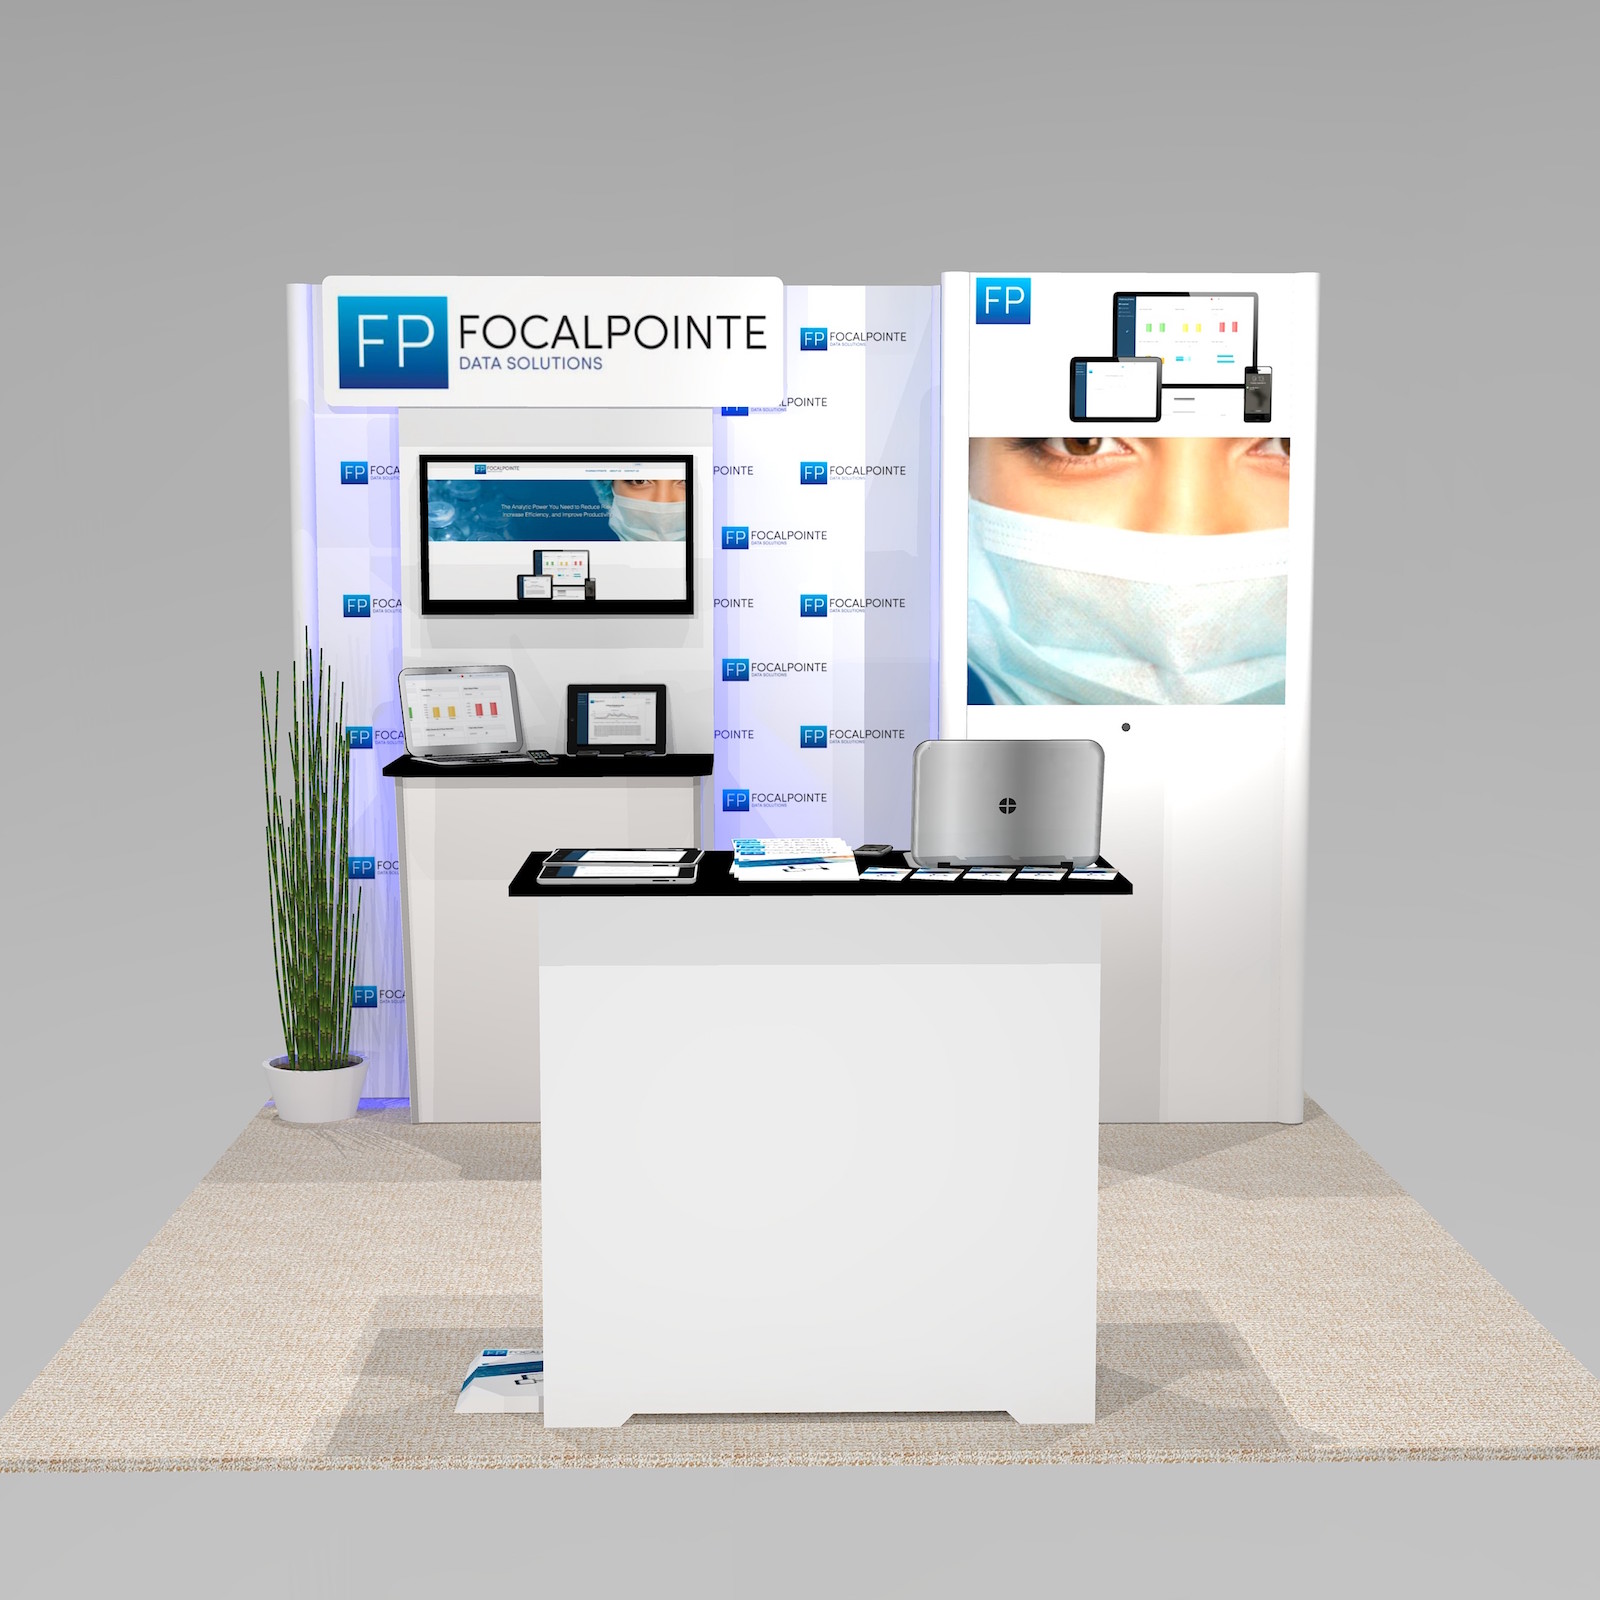 The IM1 trade show booth design features a large back lit image on the tower, with silhouette lighting behind the monitor wall section. Panel and logo sign above stand 6” in front of the main back wall for a custom 3D look. Lighting and signage make an impact. View 1